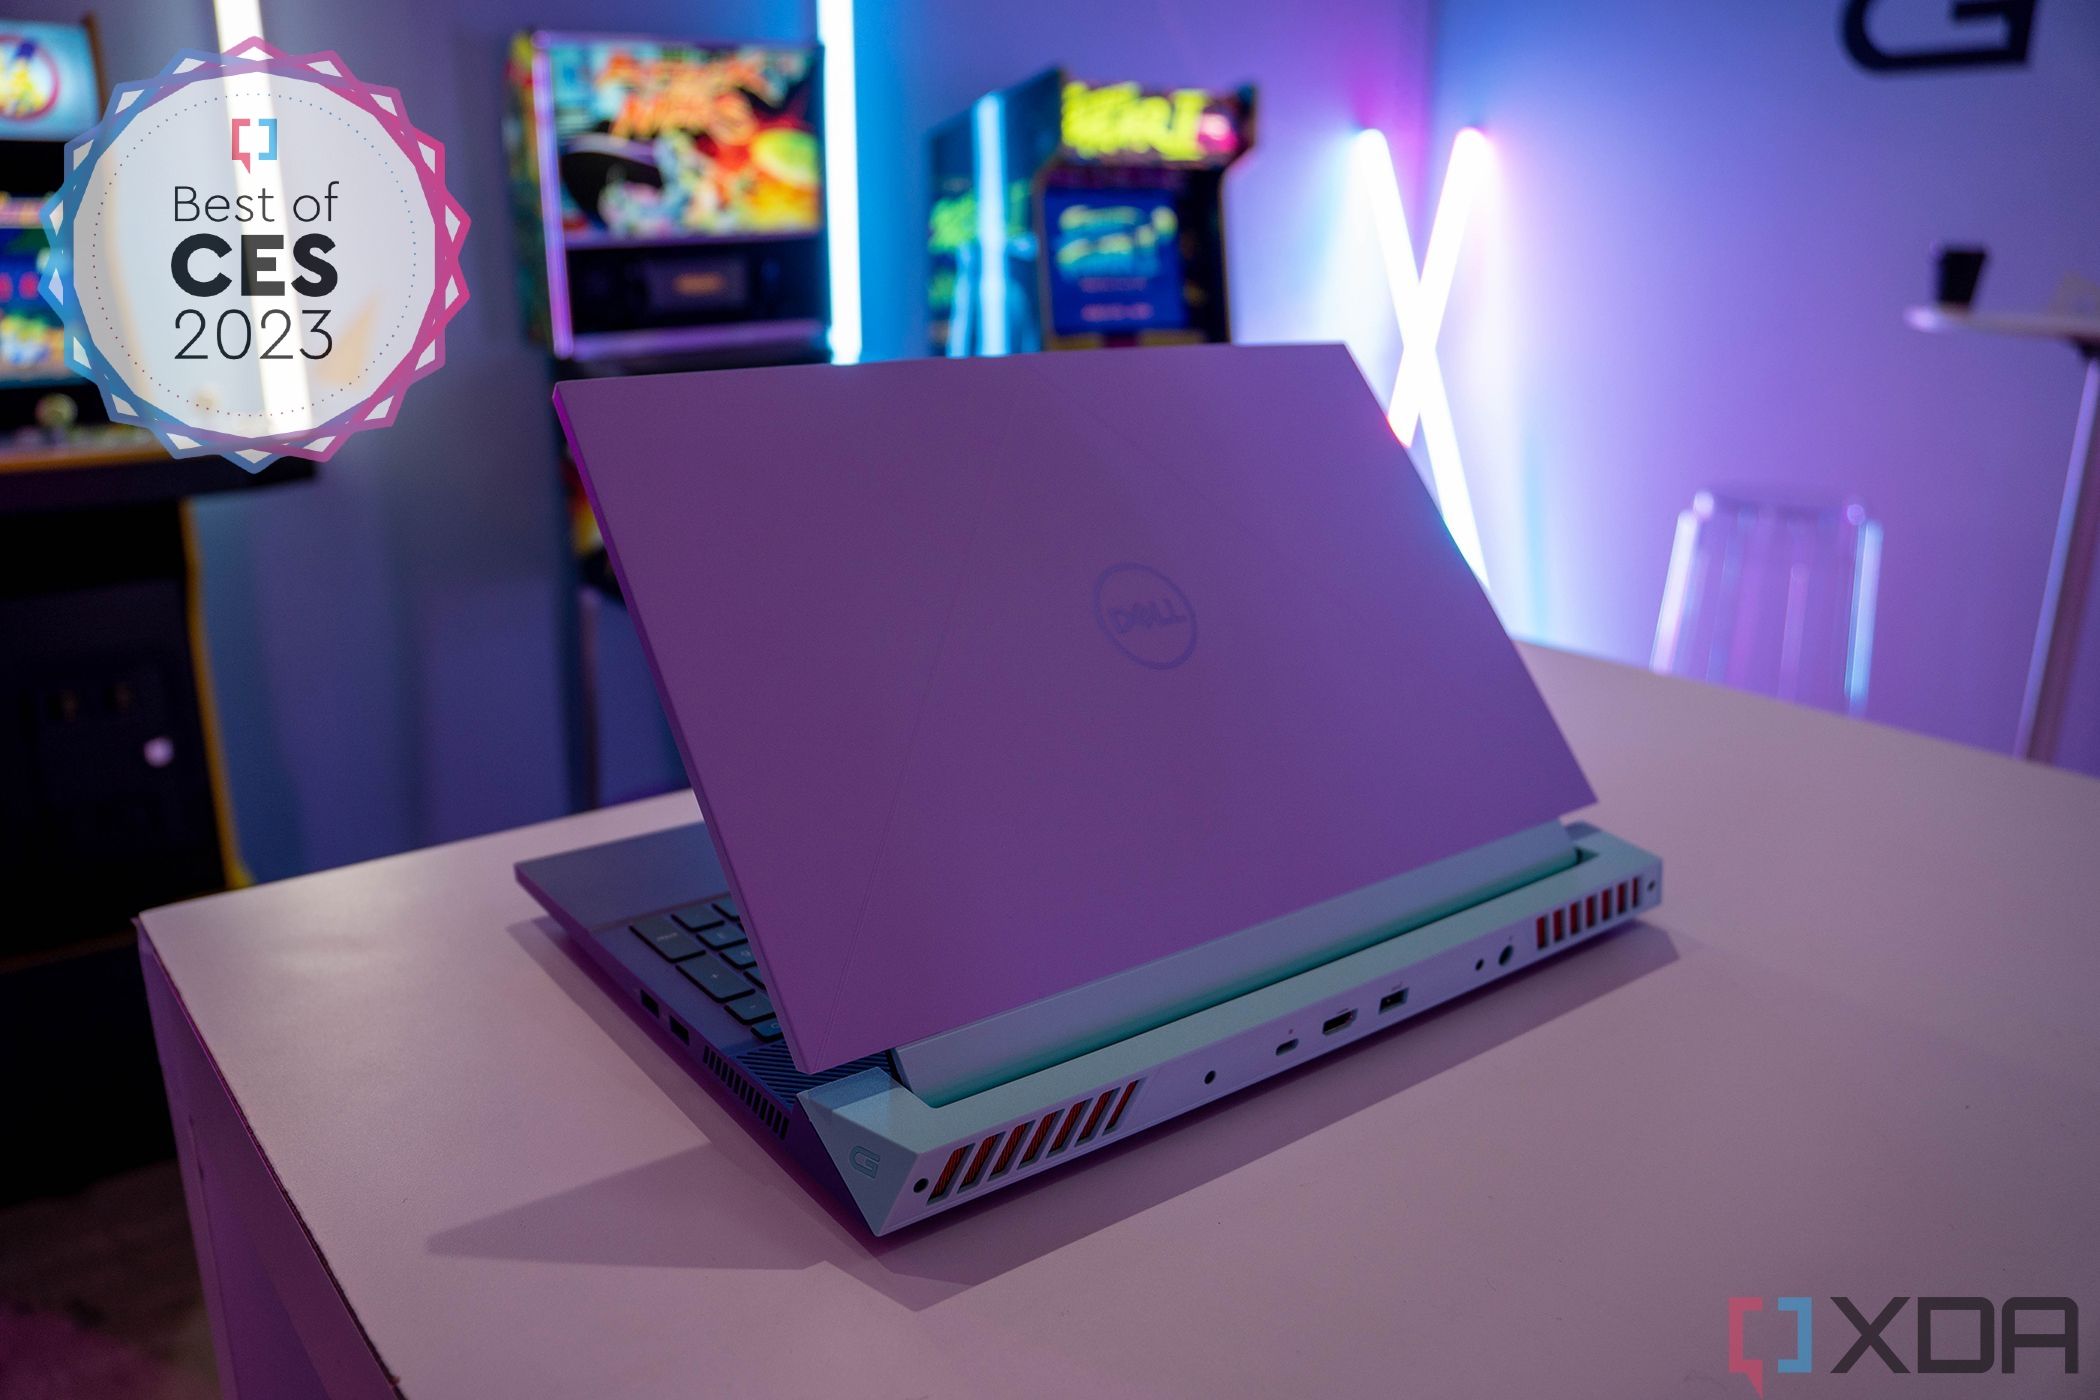 Angled rear view of the Dell G15 laptop facing right, with a purple chassis and mint green accents around the hinge. The top left corner of the image has a badge reading 